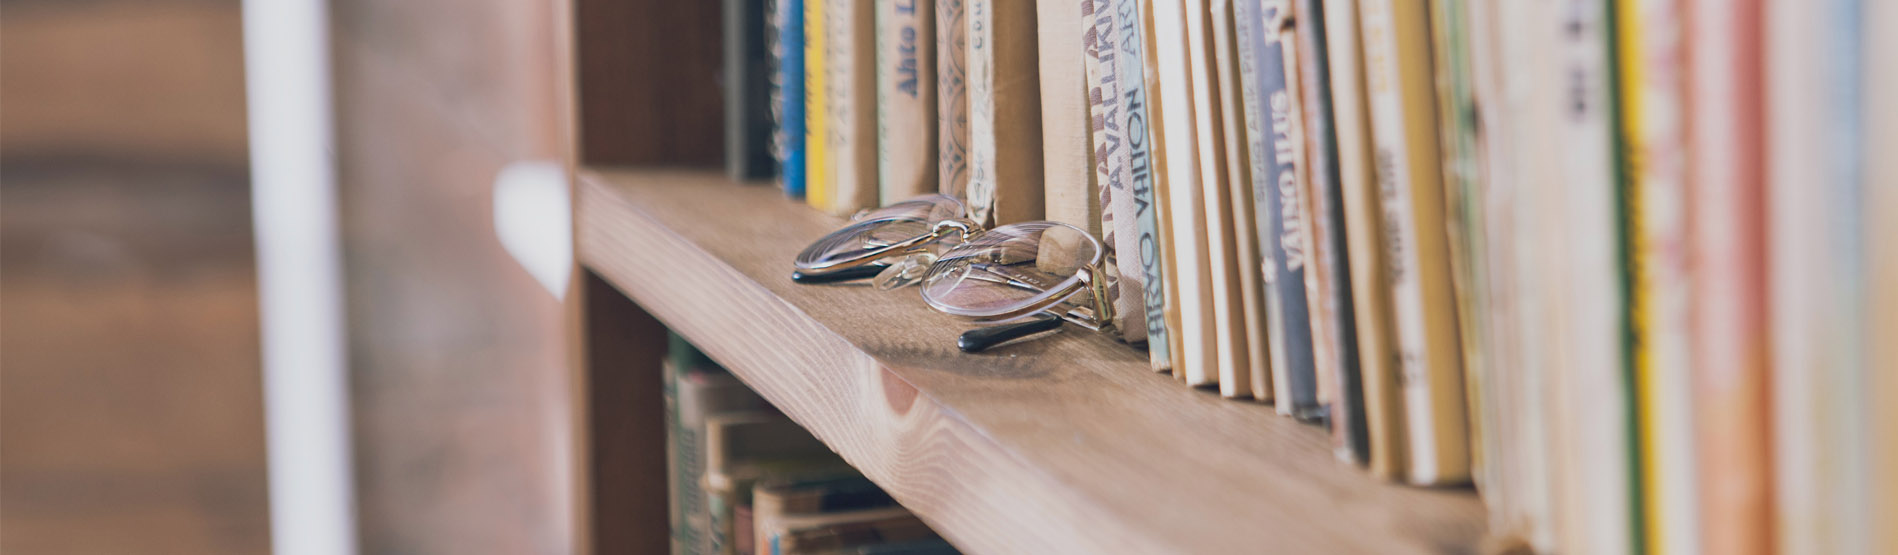 Image of a book shelf and glasses 